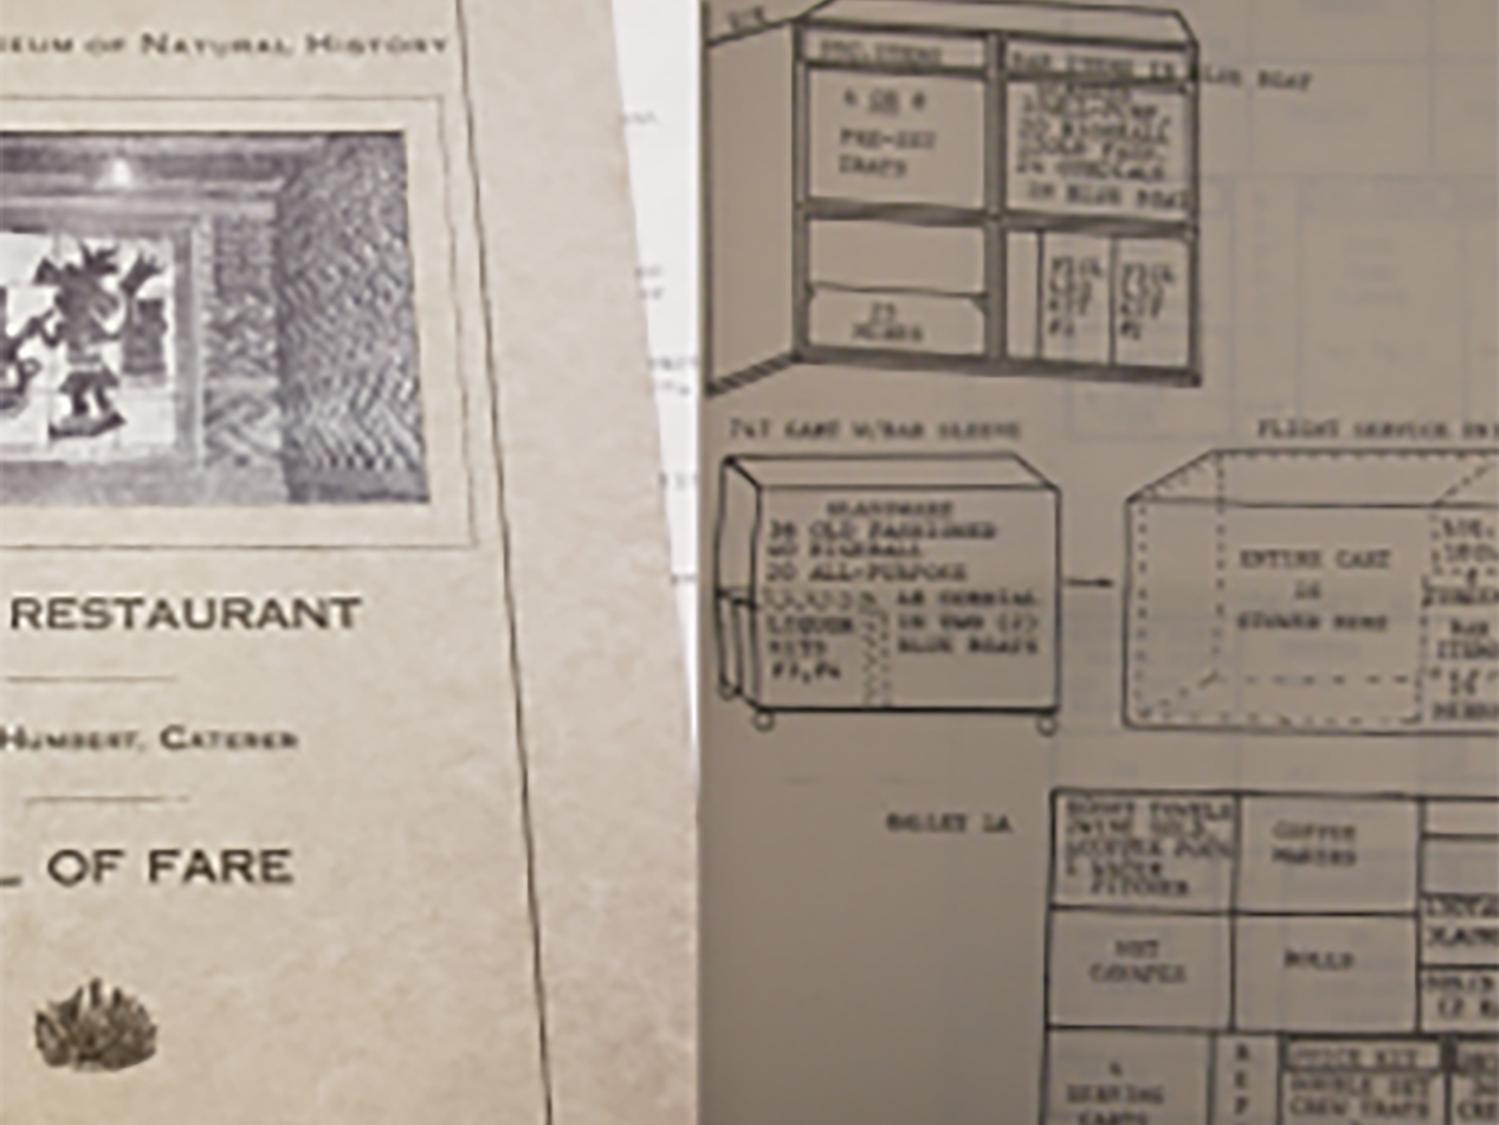 "Archival Stories of Food, Airplanes, and Museums"